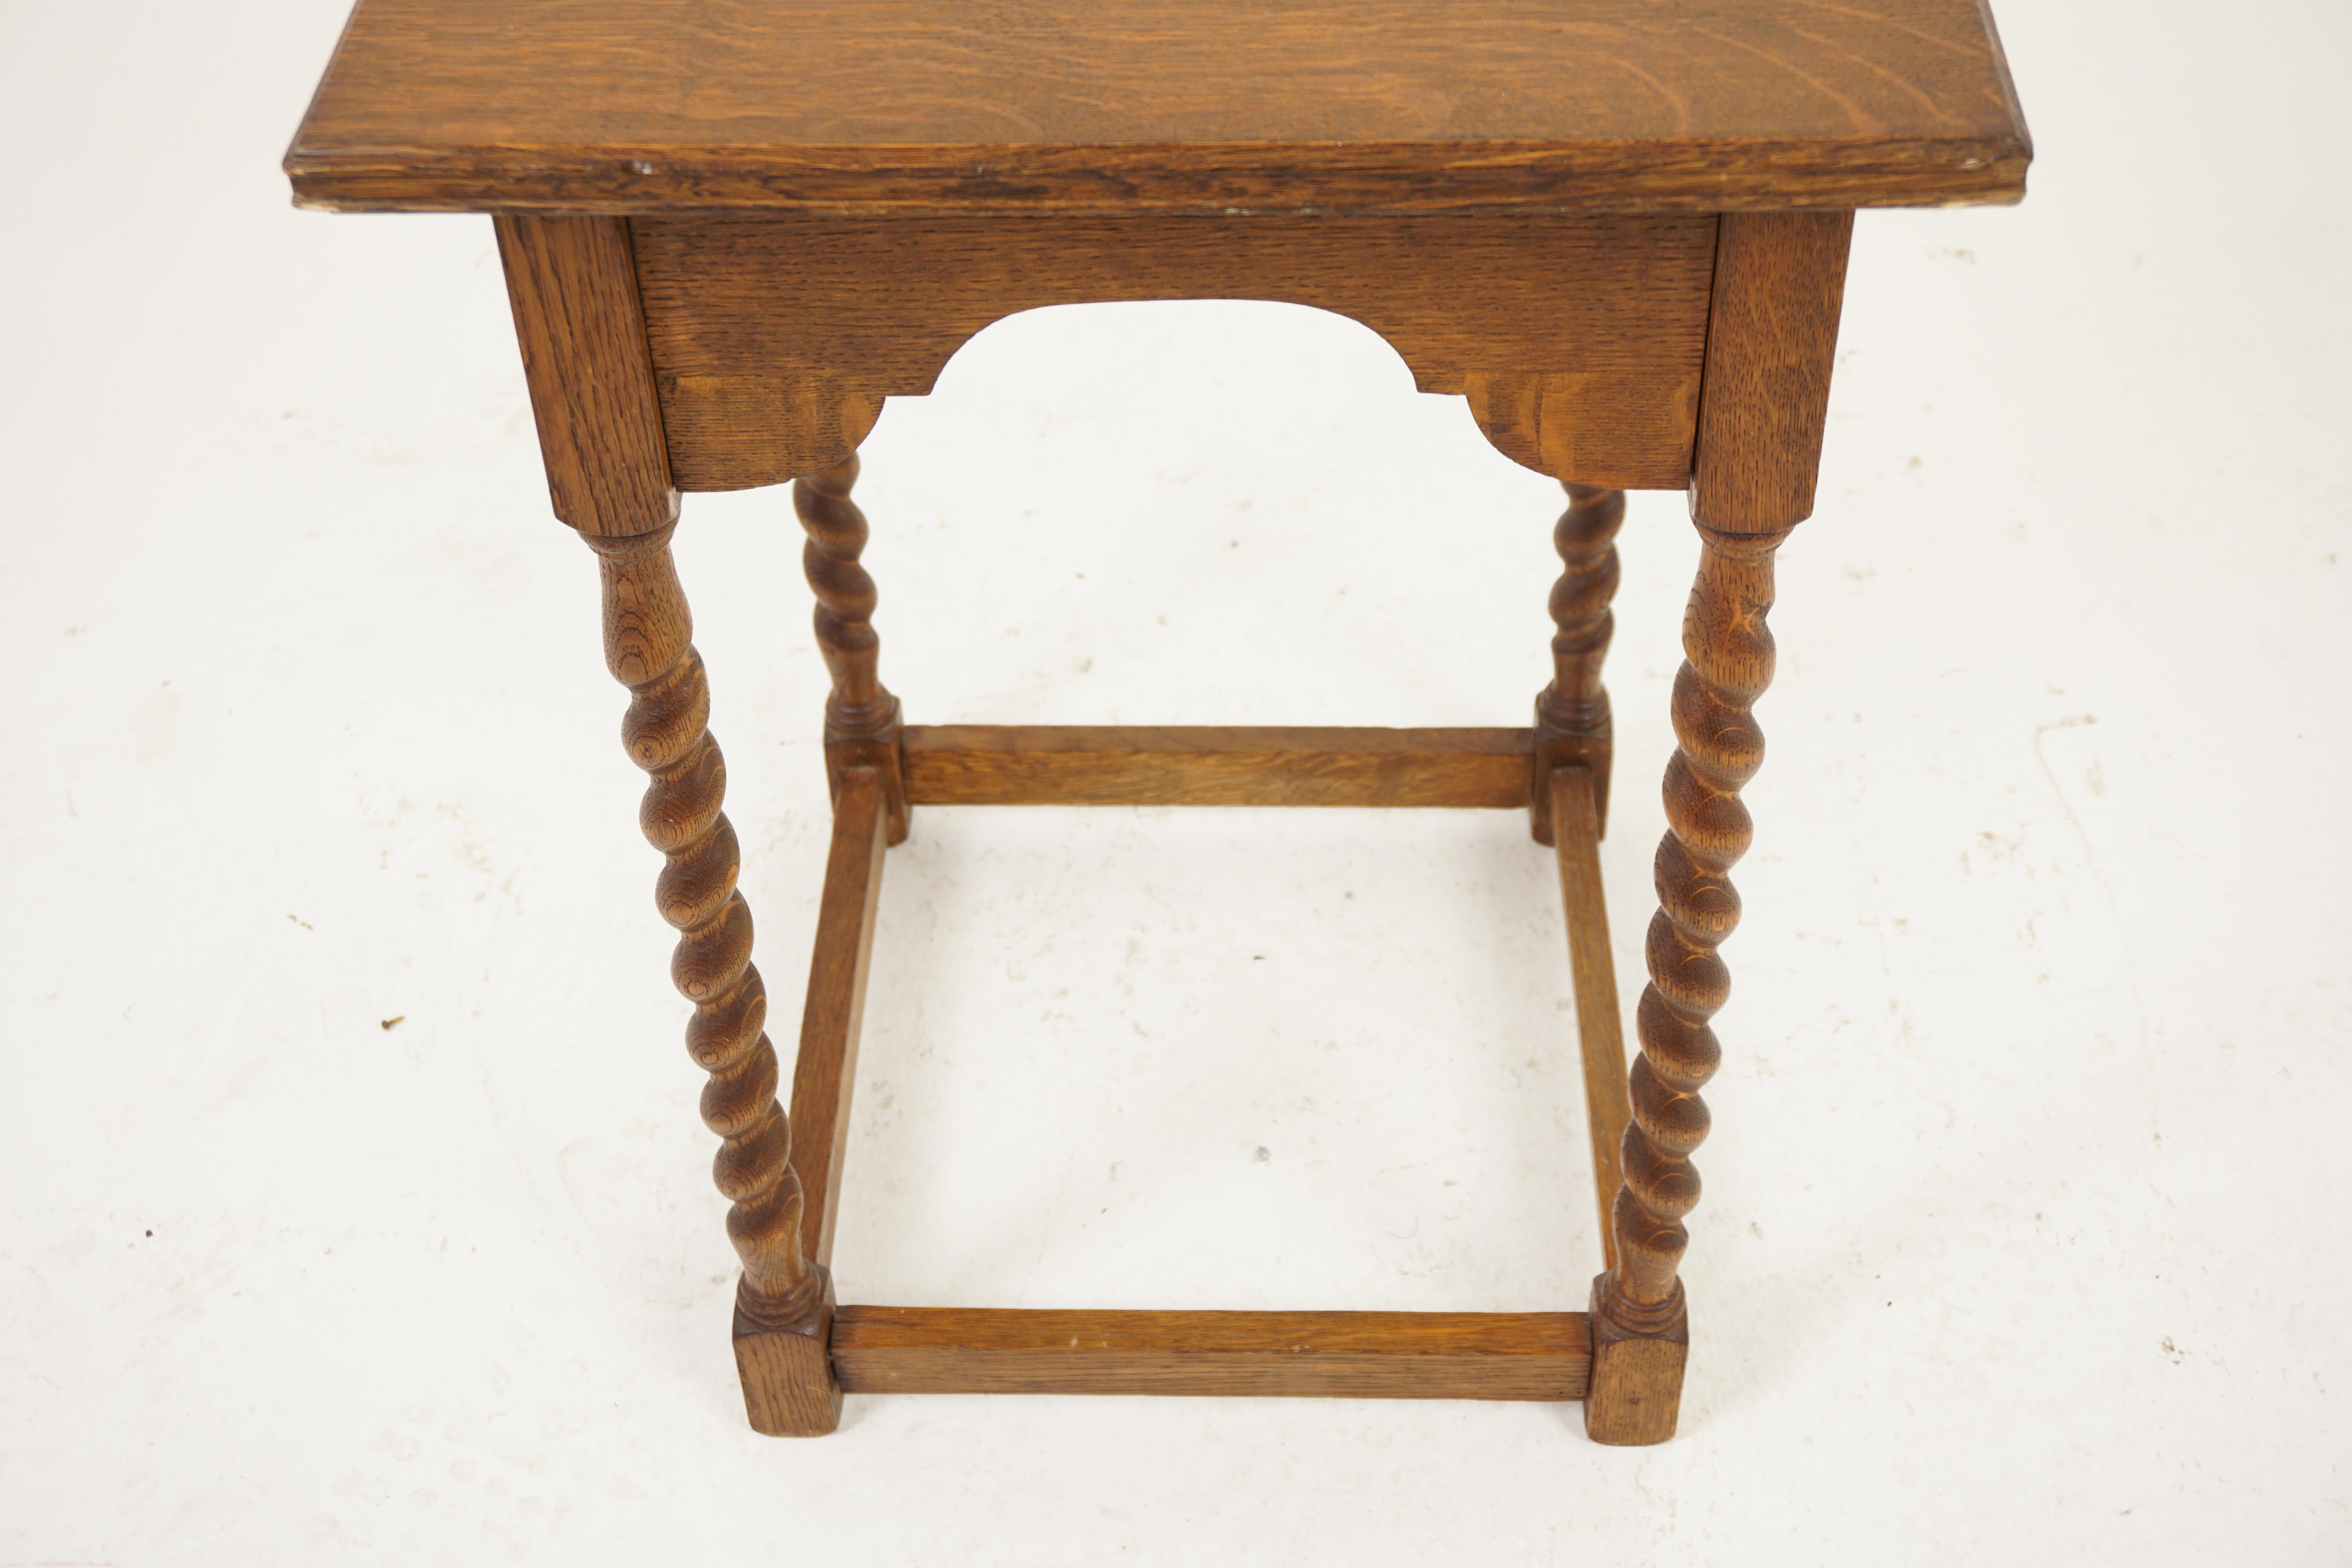 Hand-Crafted Antique Tiger Oak Table, Vintage Barley Twist Lamp Table, Scotland 1920, H000